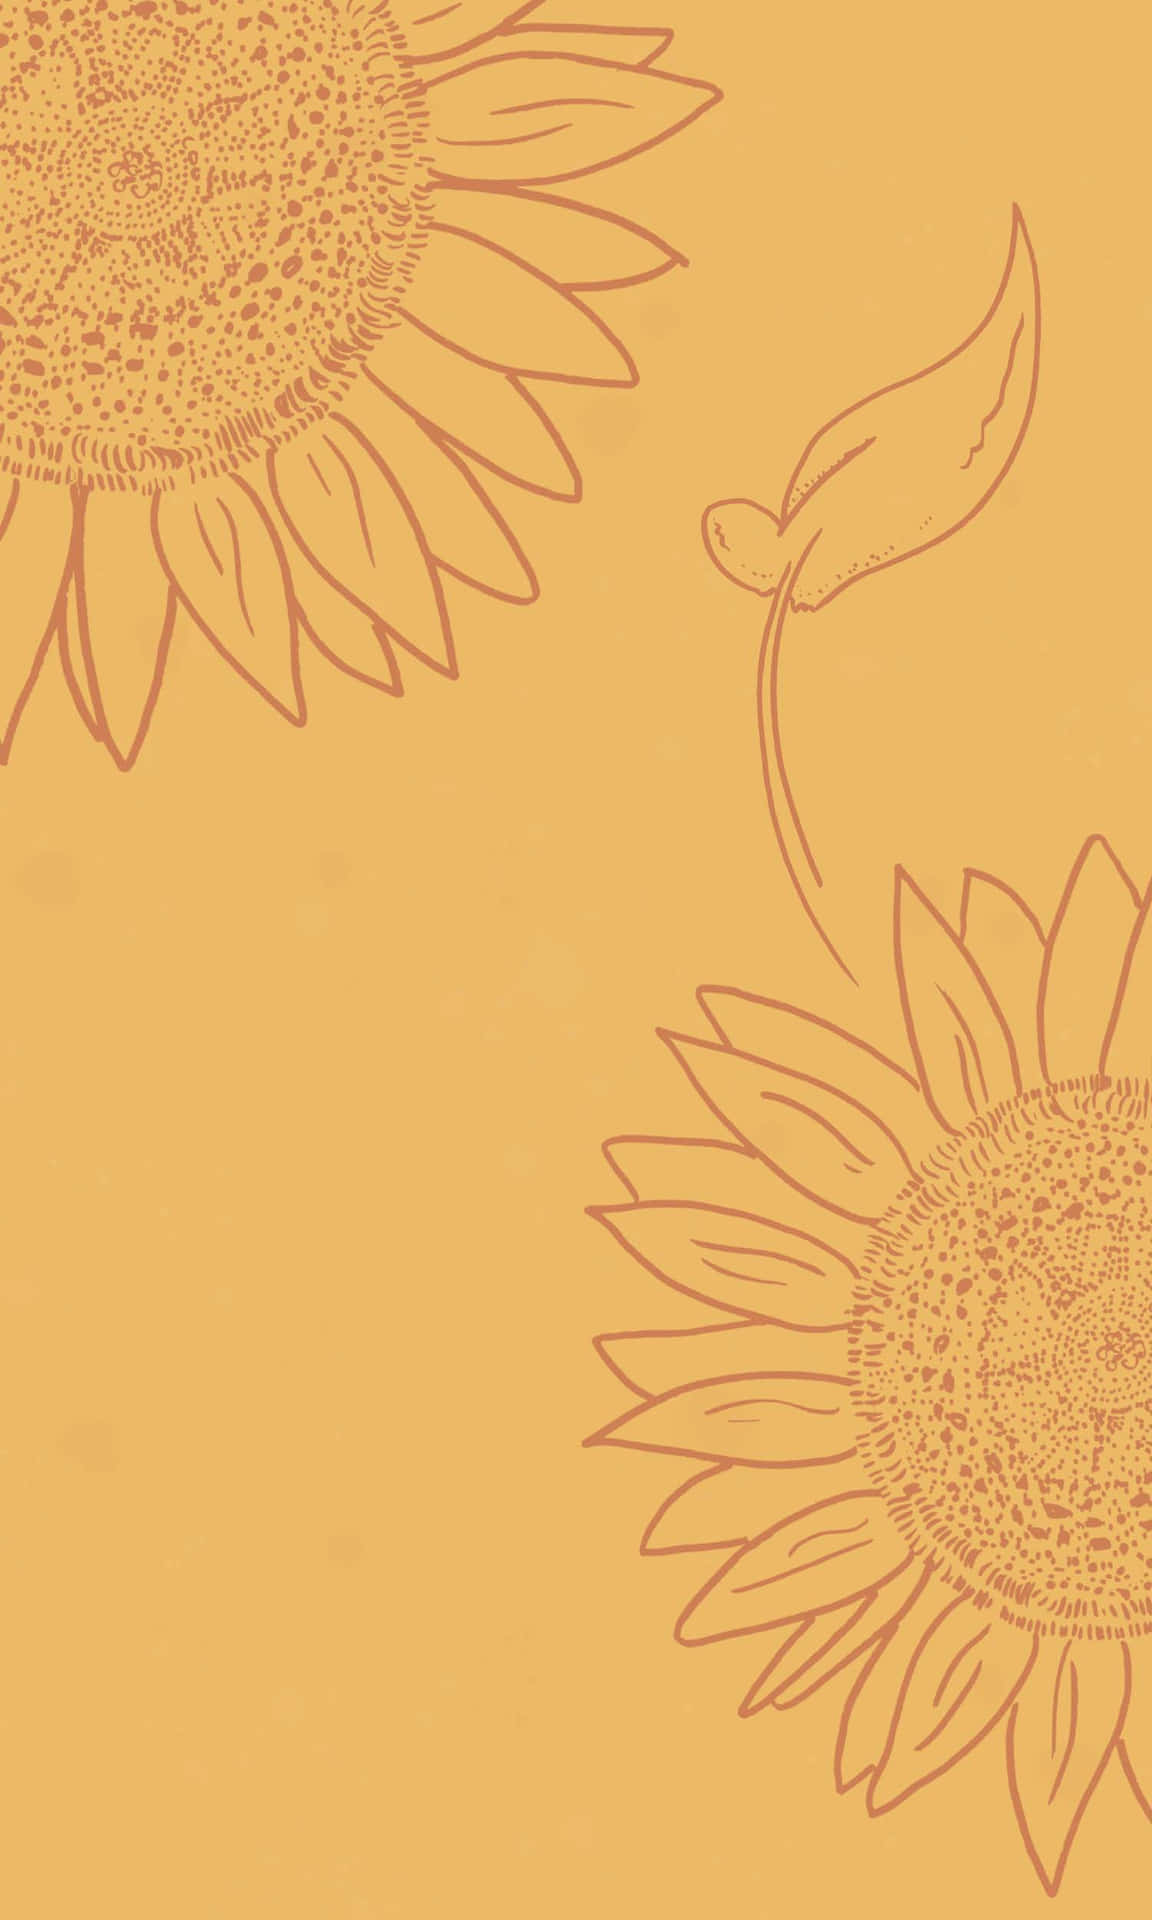 A sunny sunflower in shades of bright yellow brightening up the day Wallpaper